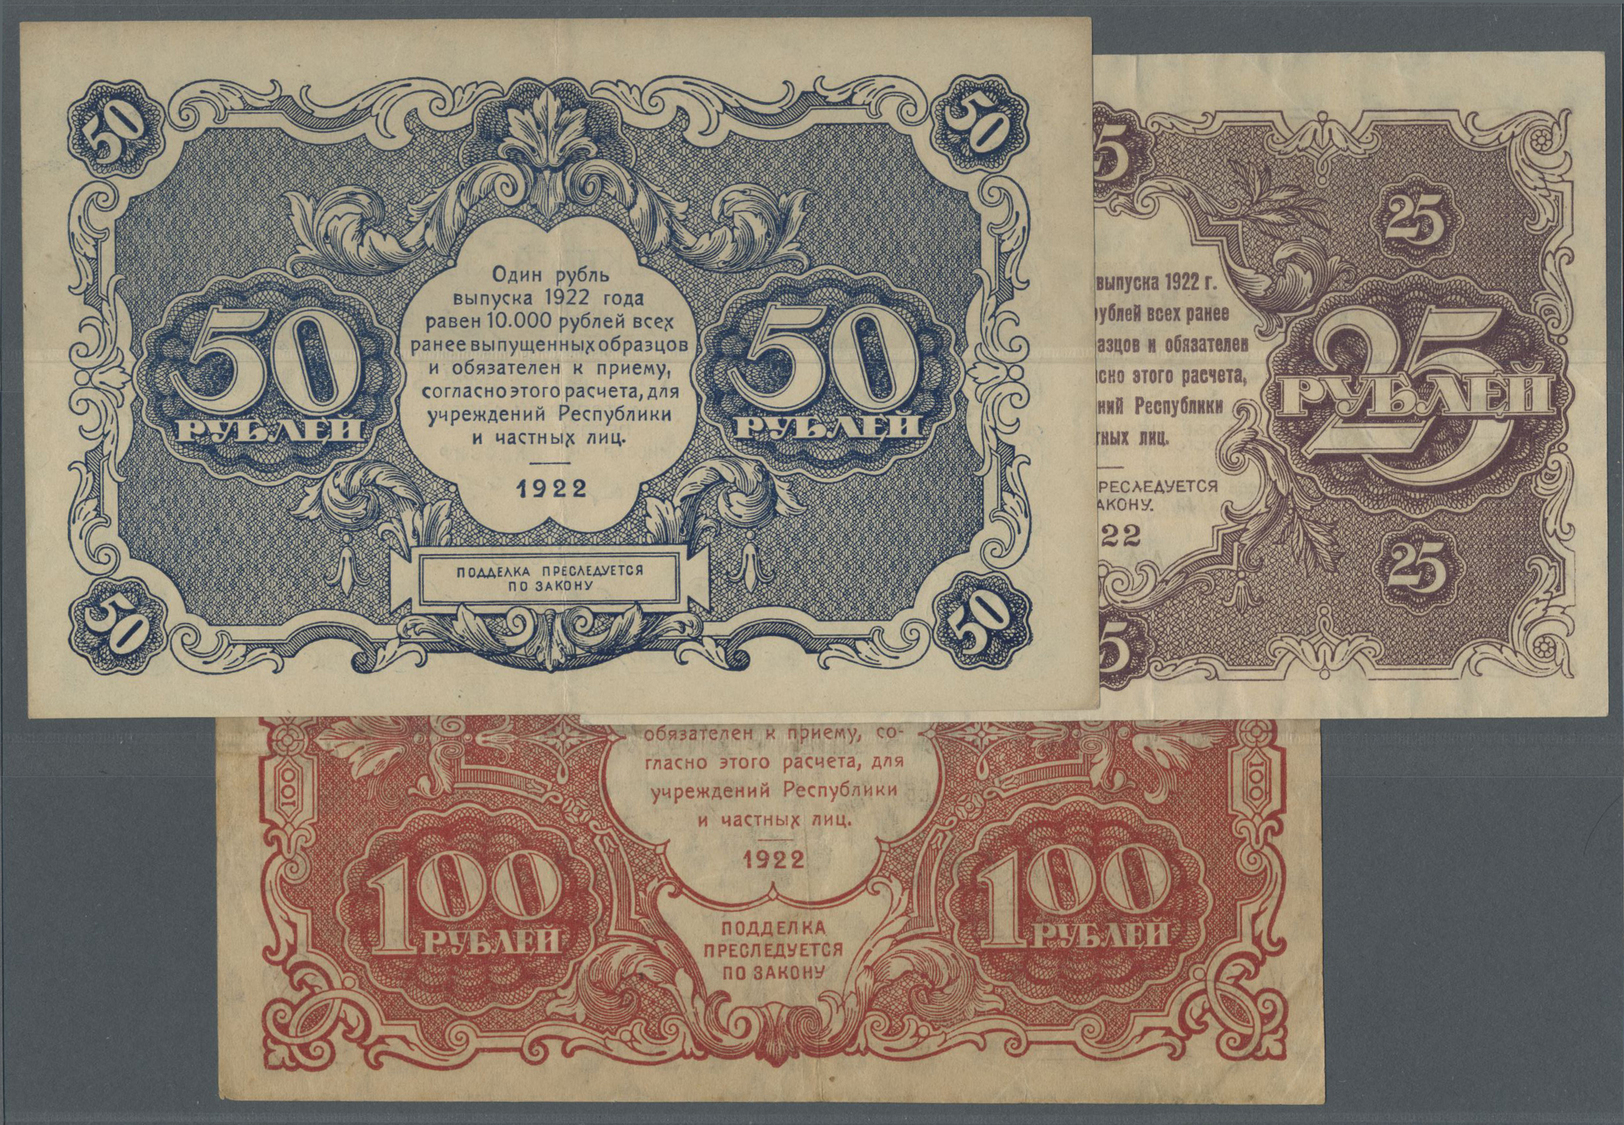 02150 Russia / Russland: Set With 3 Banknotes 25, 50 And 100 Rubles 1922, P.131-133 In Very Nice Condition With Bright C - Russia